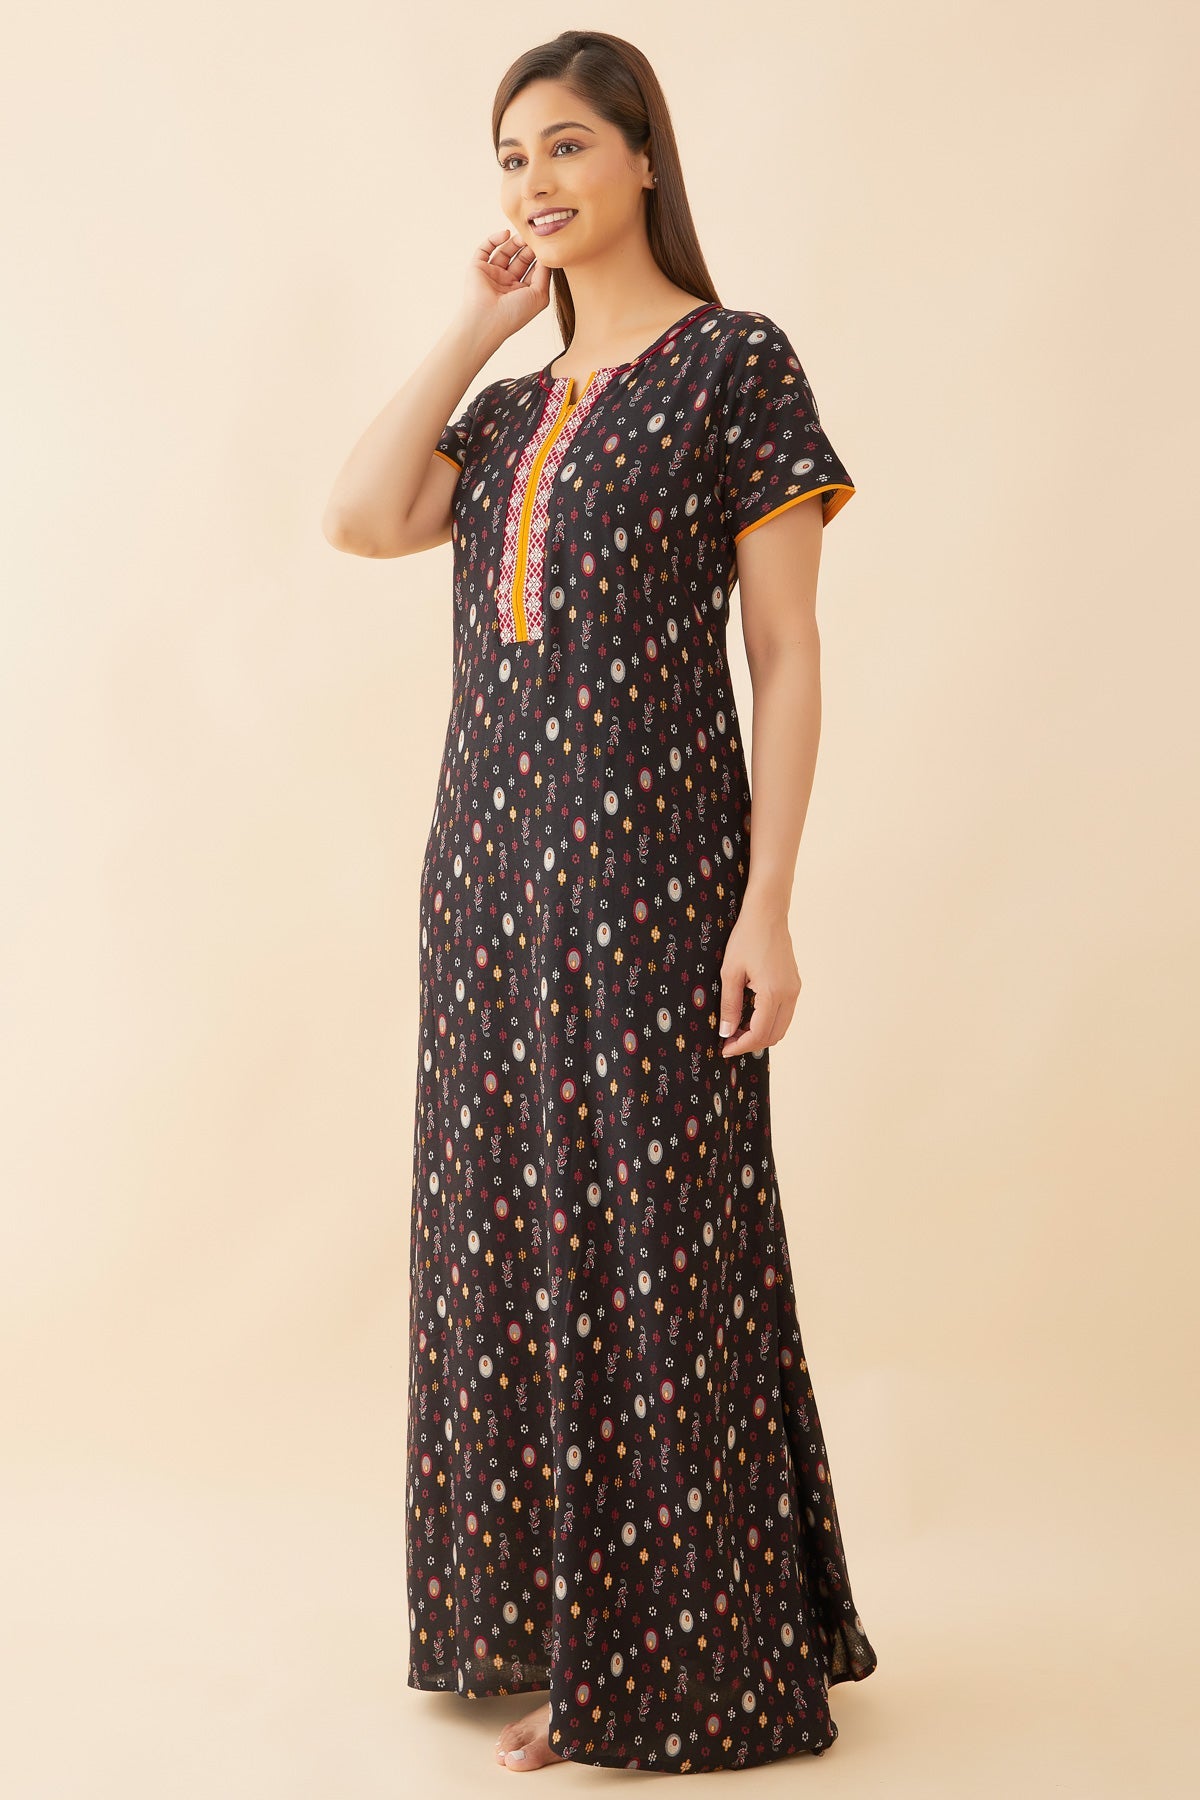 All Over Geometric Print With Contrast Embroidered Yoke Nighty Black